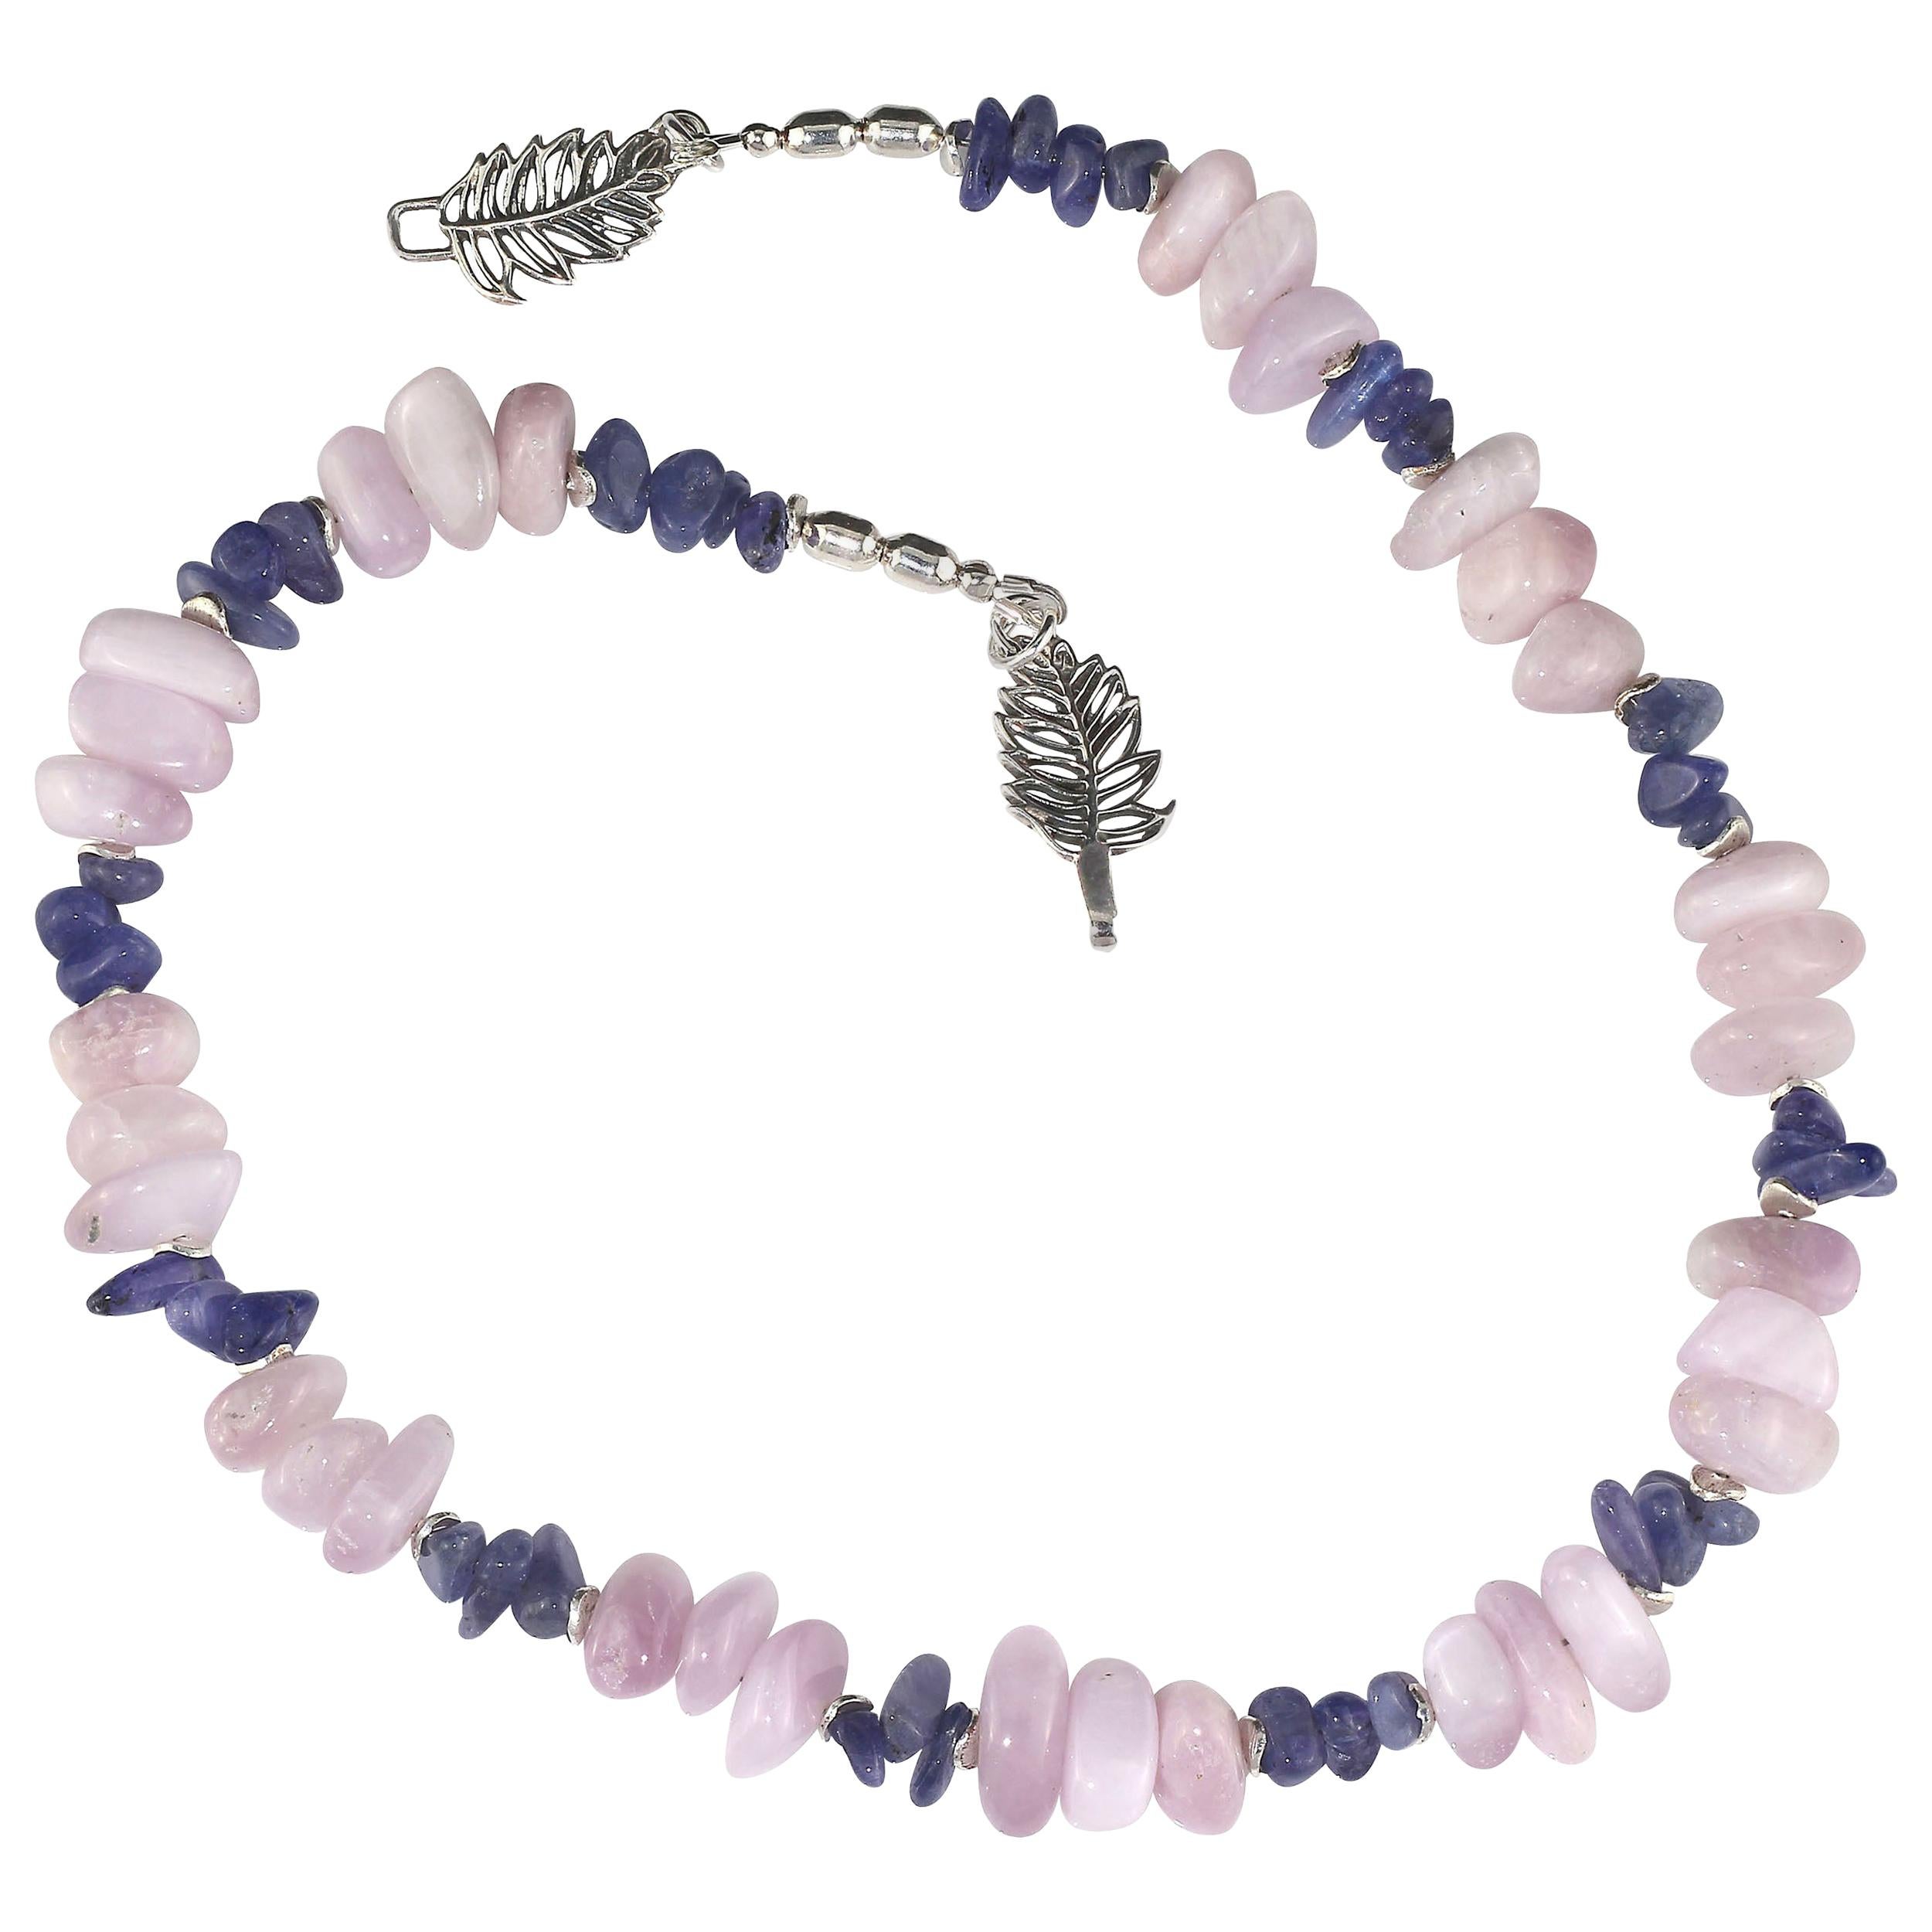 Handmade, unique necklace of glowing Kunzite nuggets and highly polished Tanzanite chips. The pinky-mauve Kunzite plays off the purpley-blue Tanzanite to create a harmoniously elegant necklace. Lovely silver flutters beautifully accent both